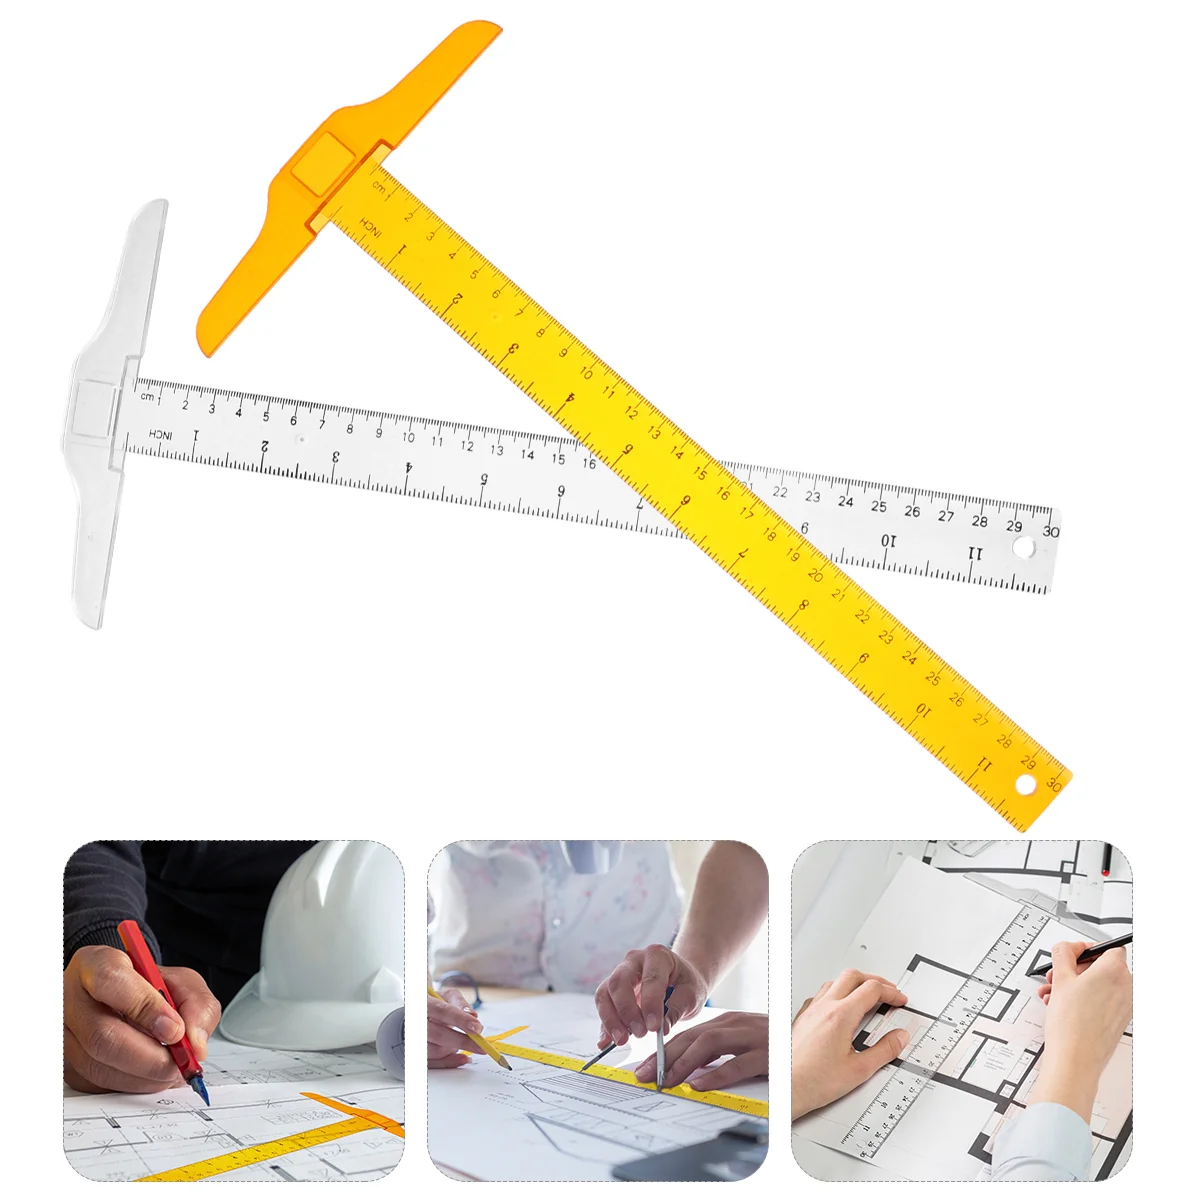 

2 Pcs Patchwork Rulers Architect Measuring Tool Clear Drawing Ruler Graduated t Square Architect Drawing Supply T Shape Ruler